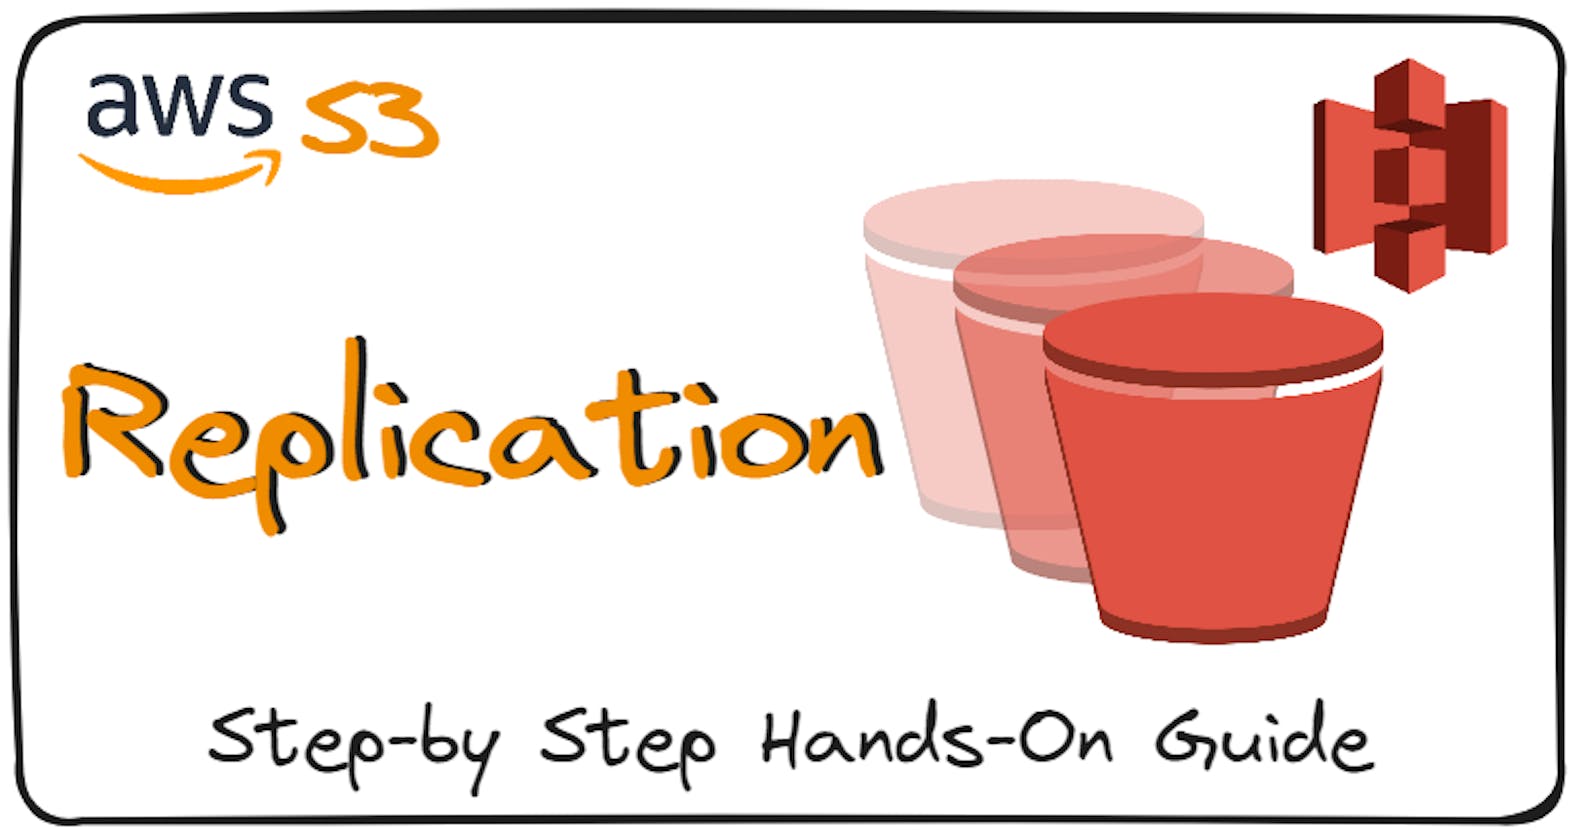 Amazon S3 Replication: Hands-On | A Step-by-Step Guide